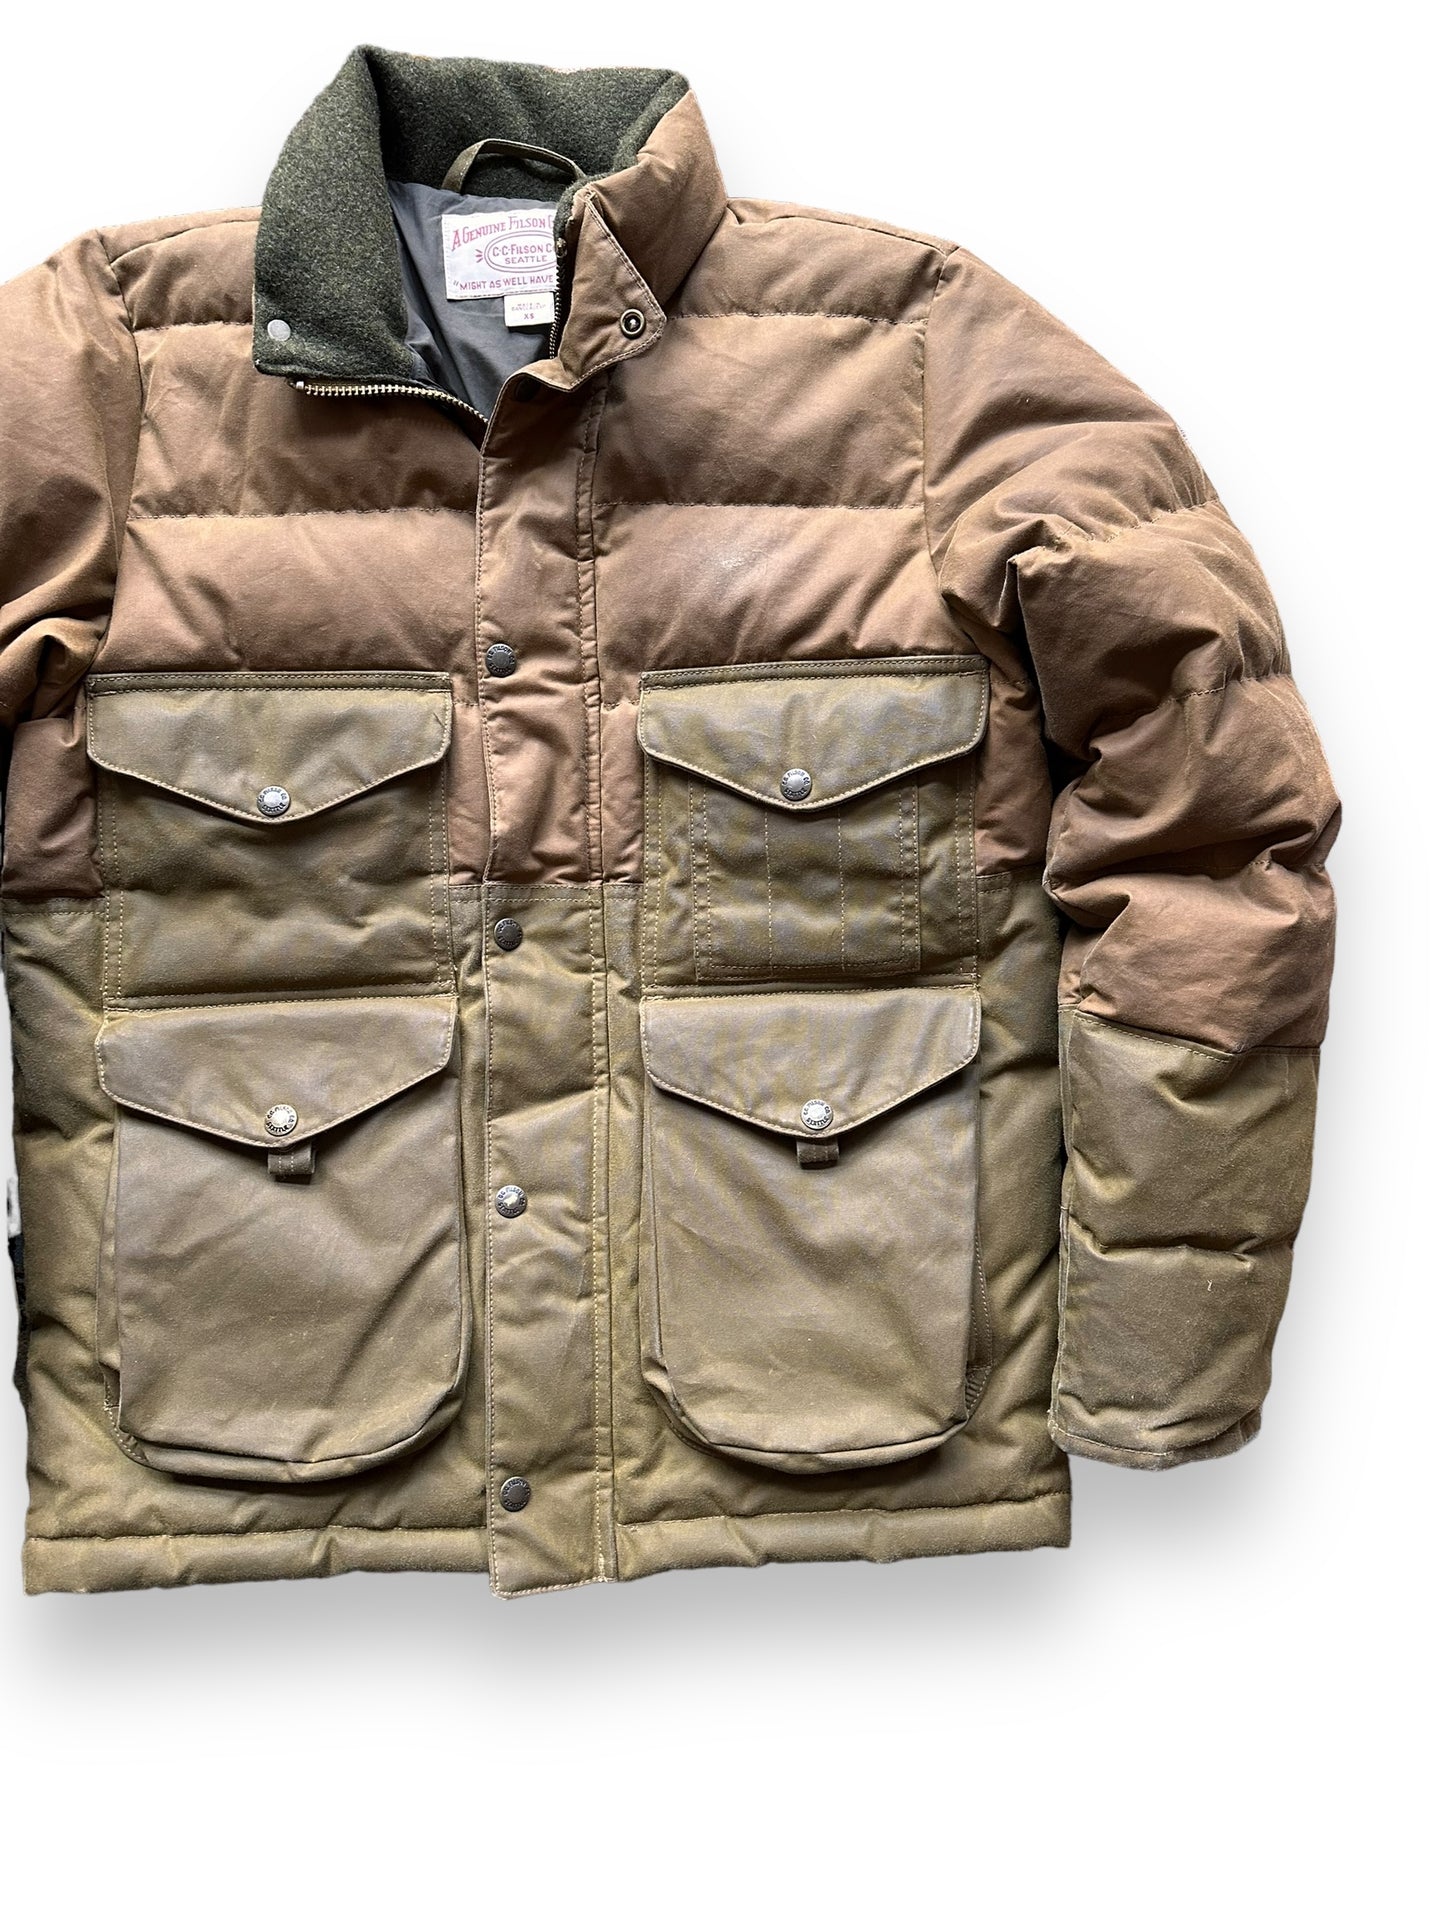 Front Left View of Filson Down Cruiser Jacket SZ XS | Filson Down Cruiser | Filson Workwear Seattle